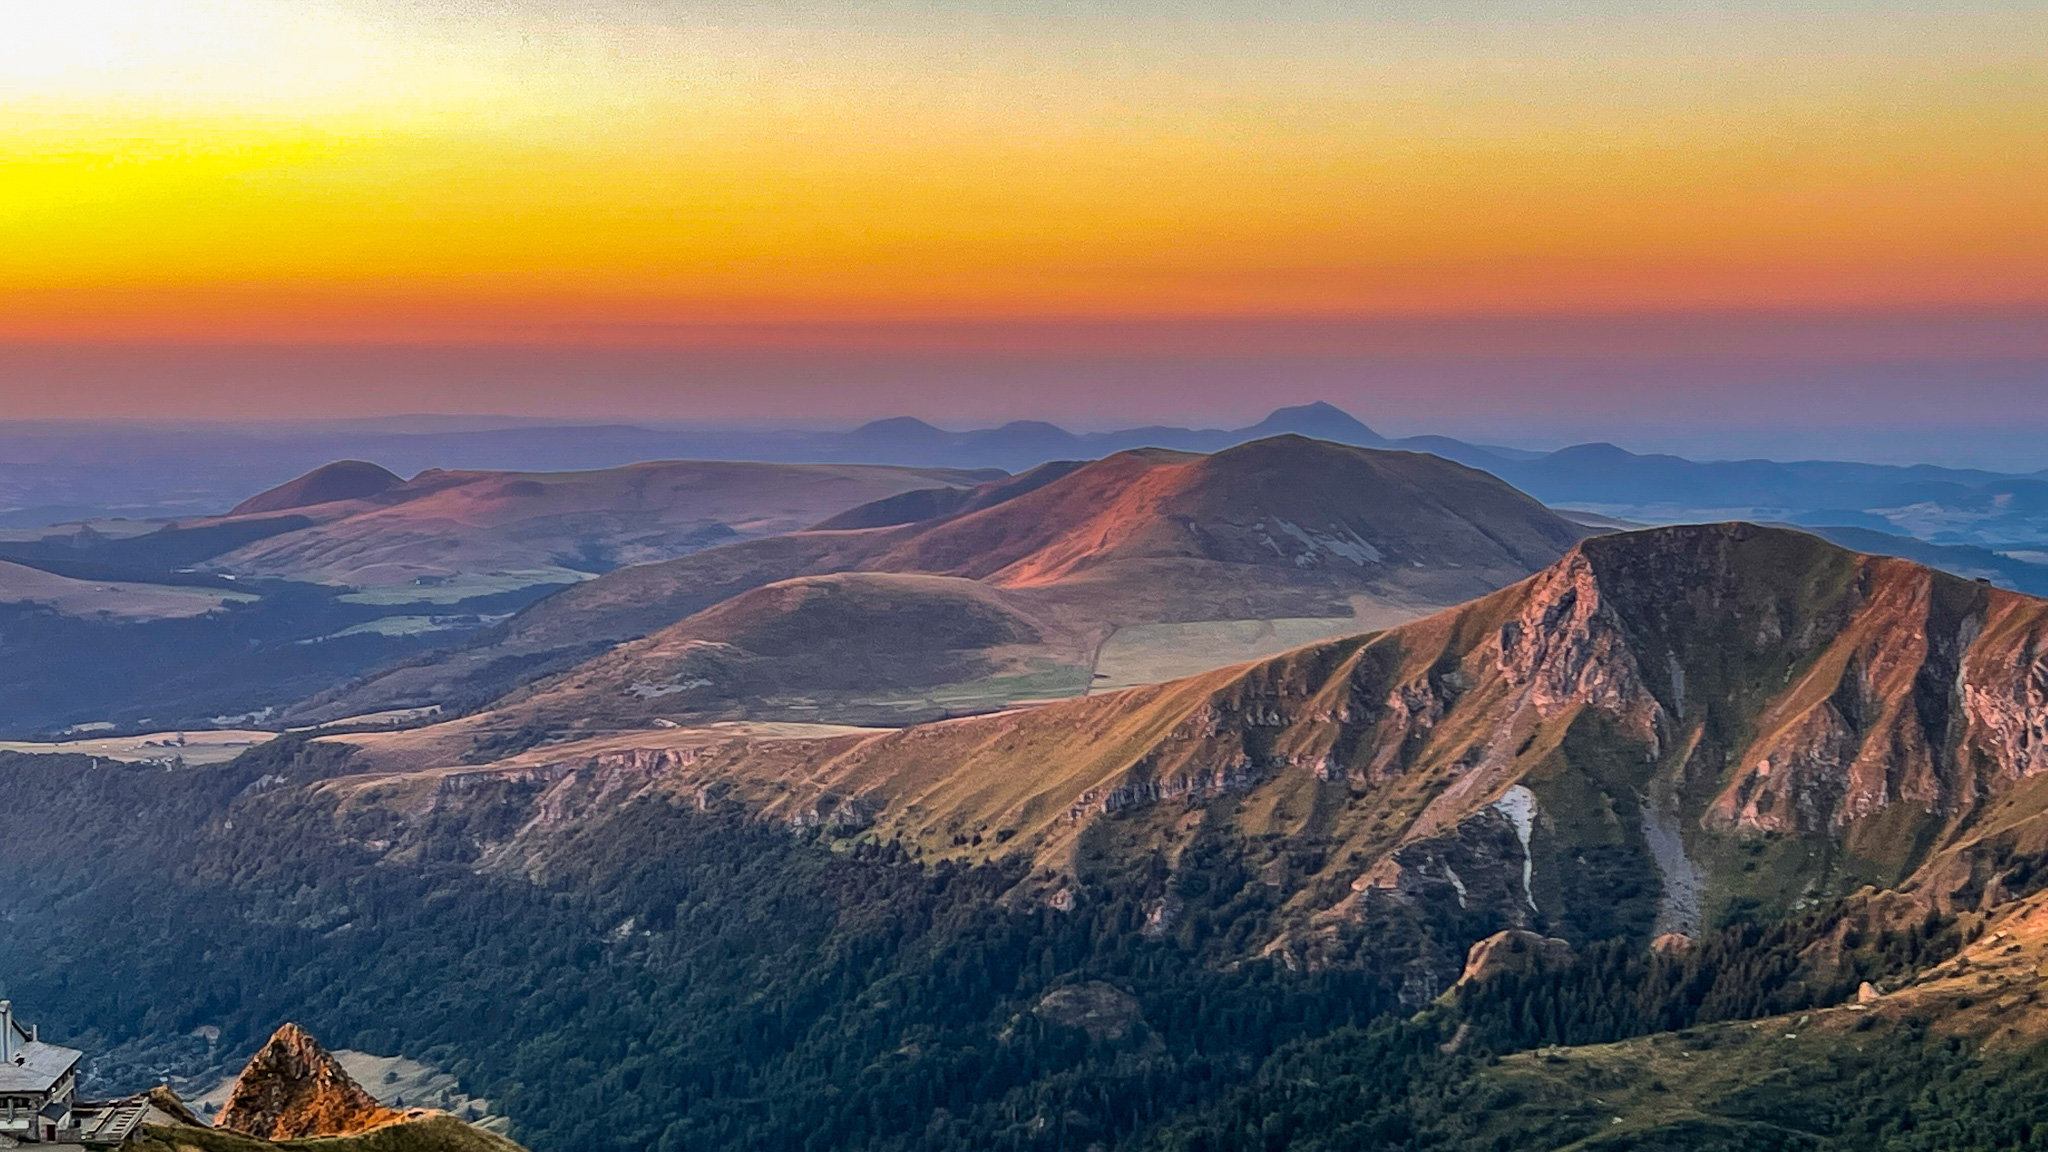 Sunset from Puy Gris to Roc de Cuzeau and view of the Chaîne des Puys